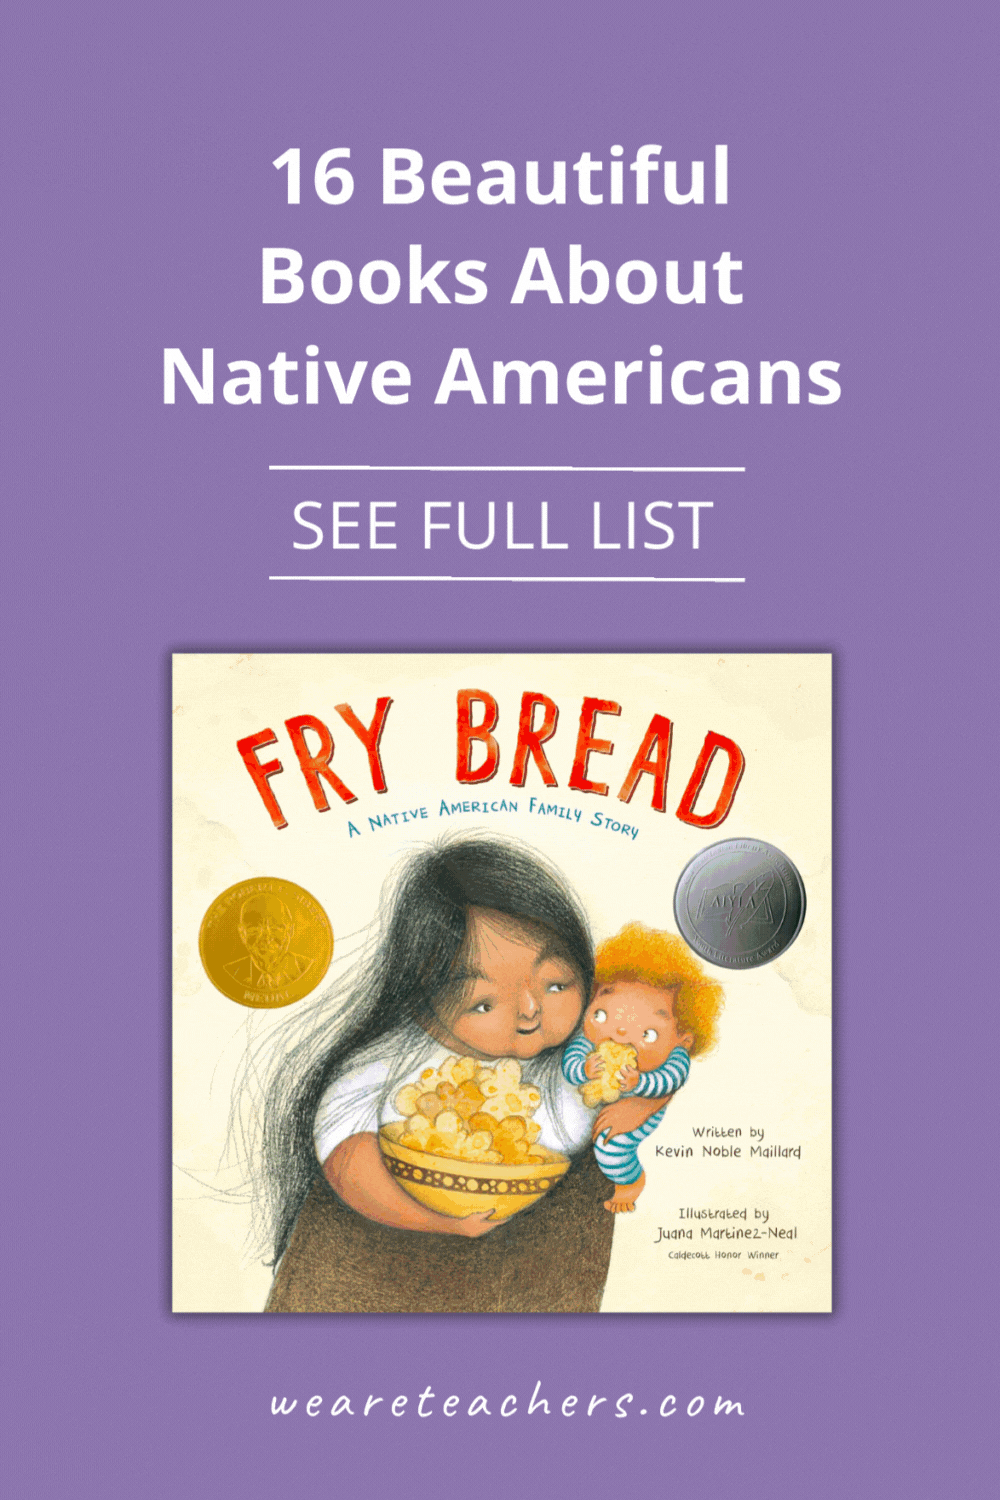 Books about Native Americans weave tales of the past into the present. They are filled with culture and tradition with an emphasis on nature.